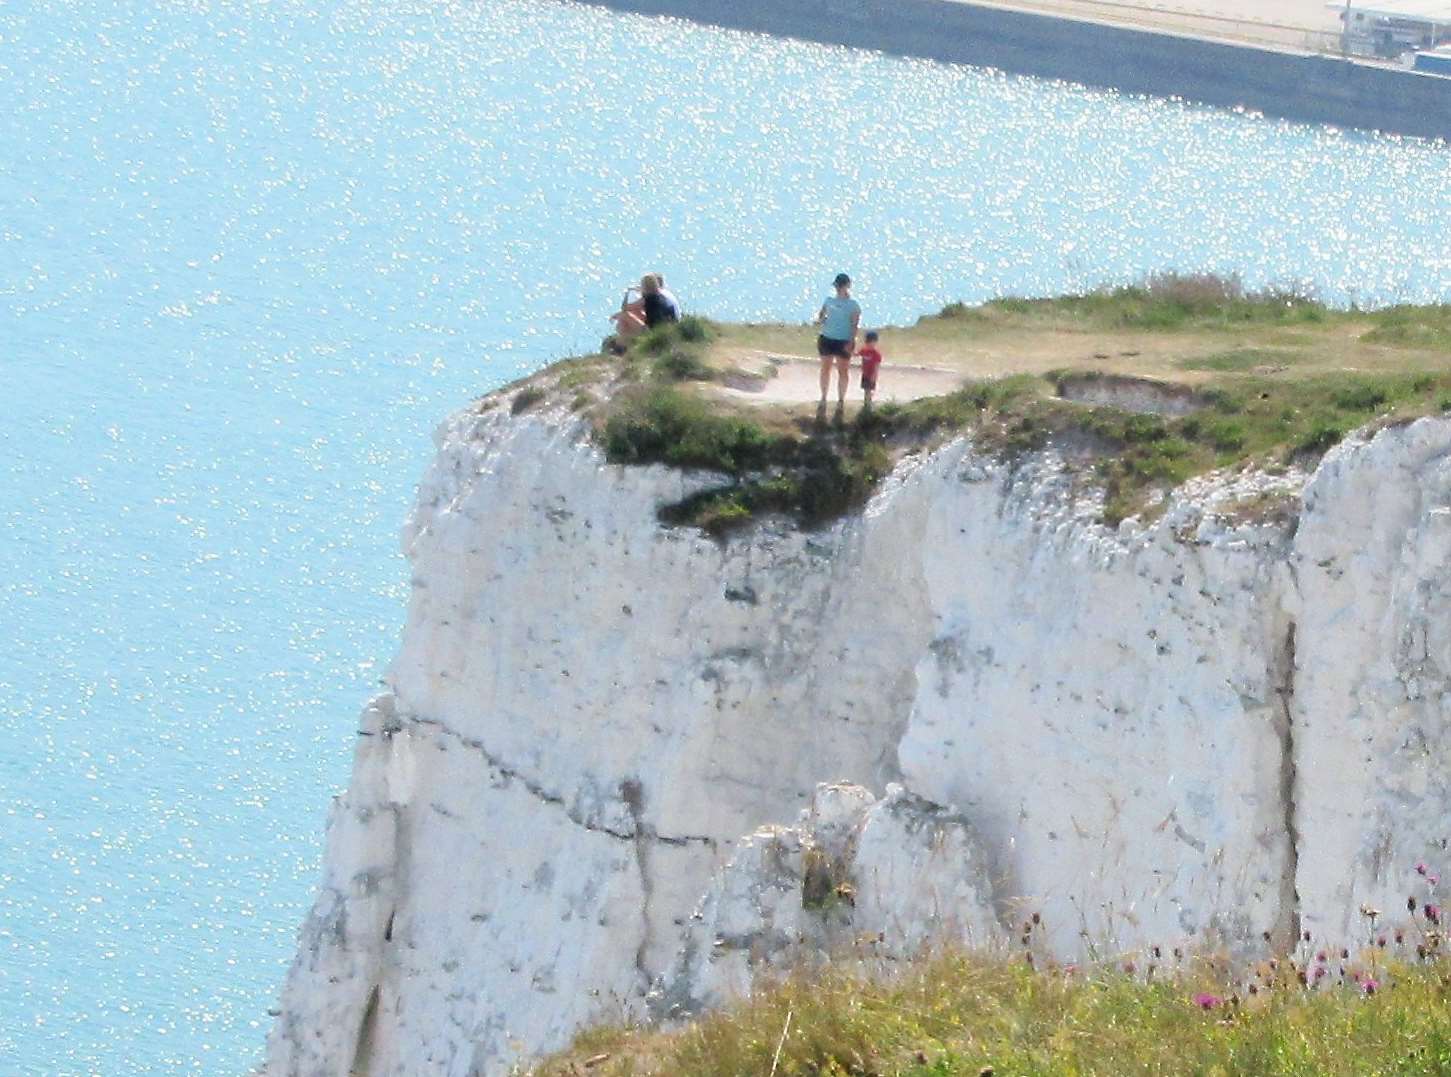 Ted Prangnell captured this scene and others showing more people close to the edge during a visit to the South Foreland lighthouse